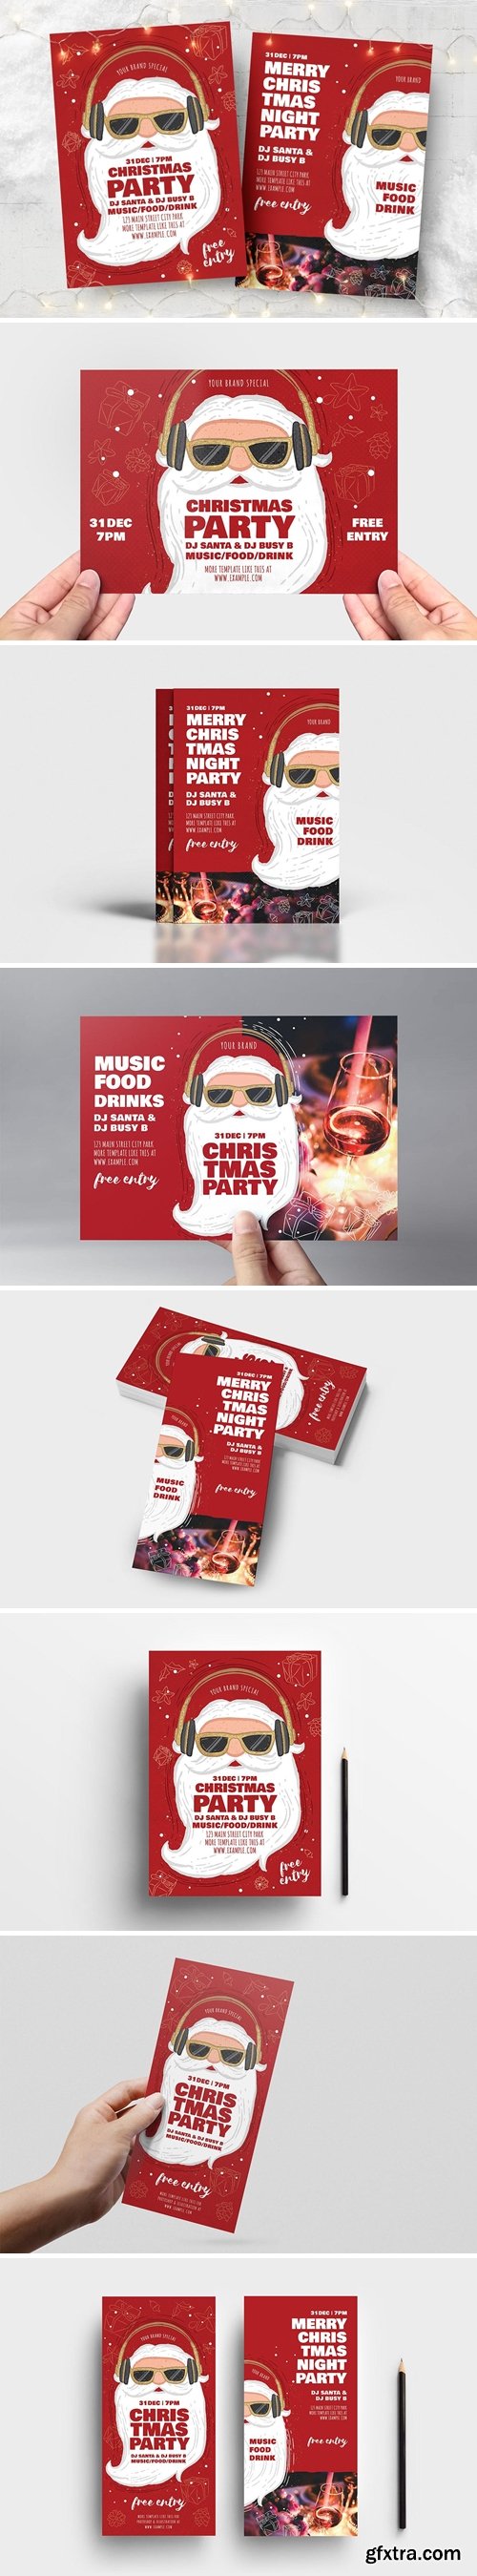 Christmas Party Poster/ Flyer Template